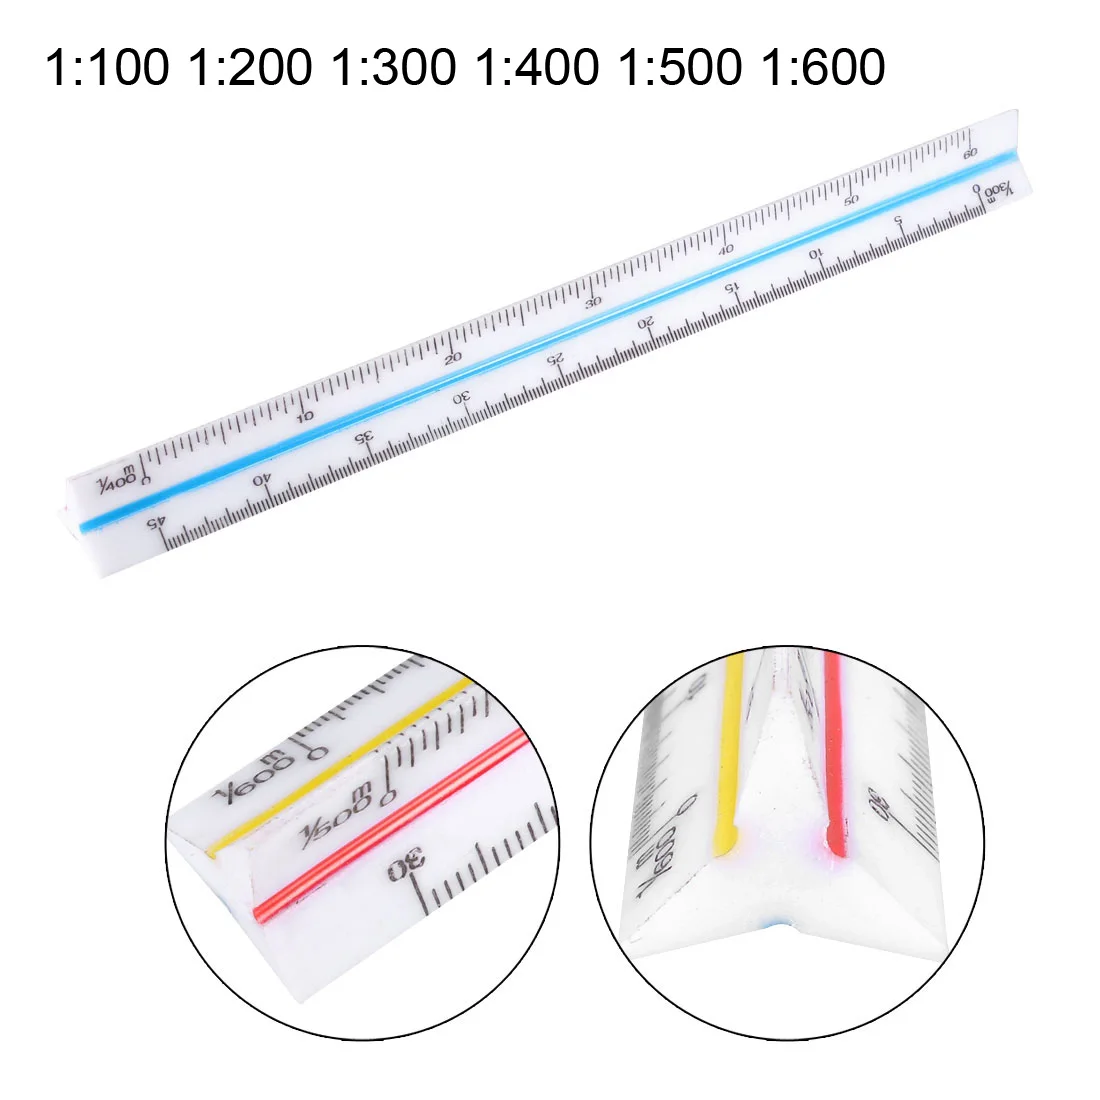 цена Triangular Scale Ruler 15cm Plastic Drafting Triangle Scale Architect Engineer Technical Ruler Stationery 1:100 - 1:600